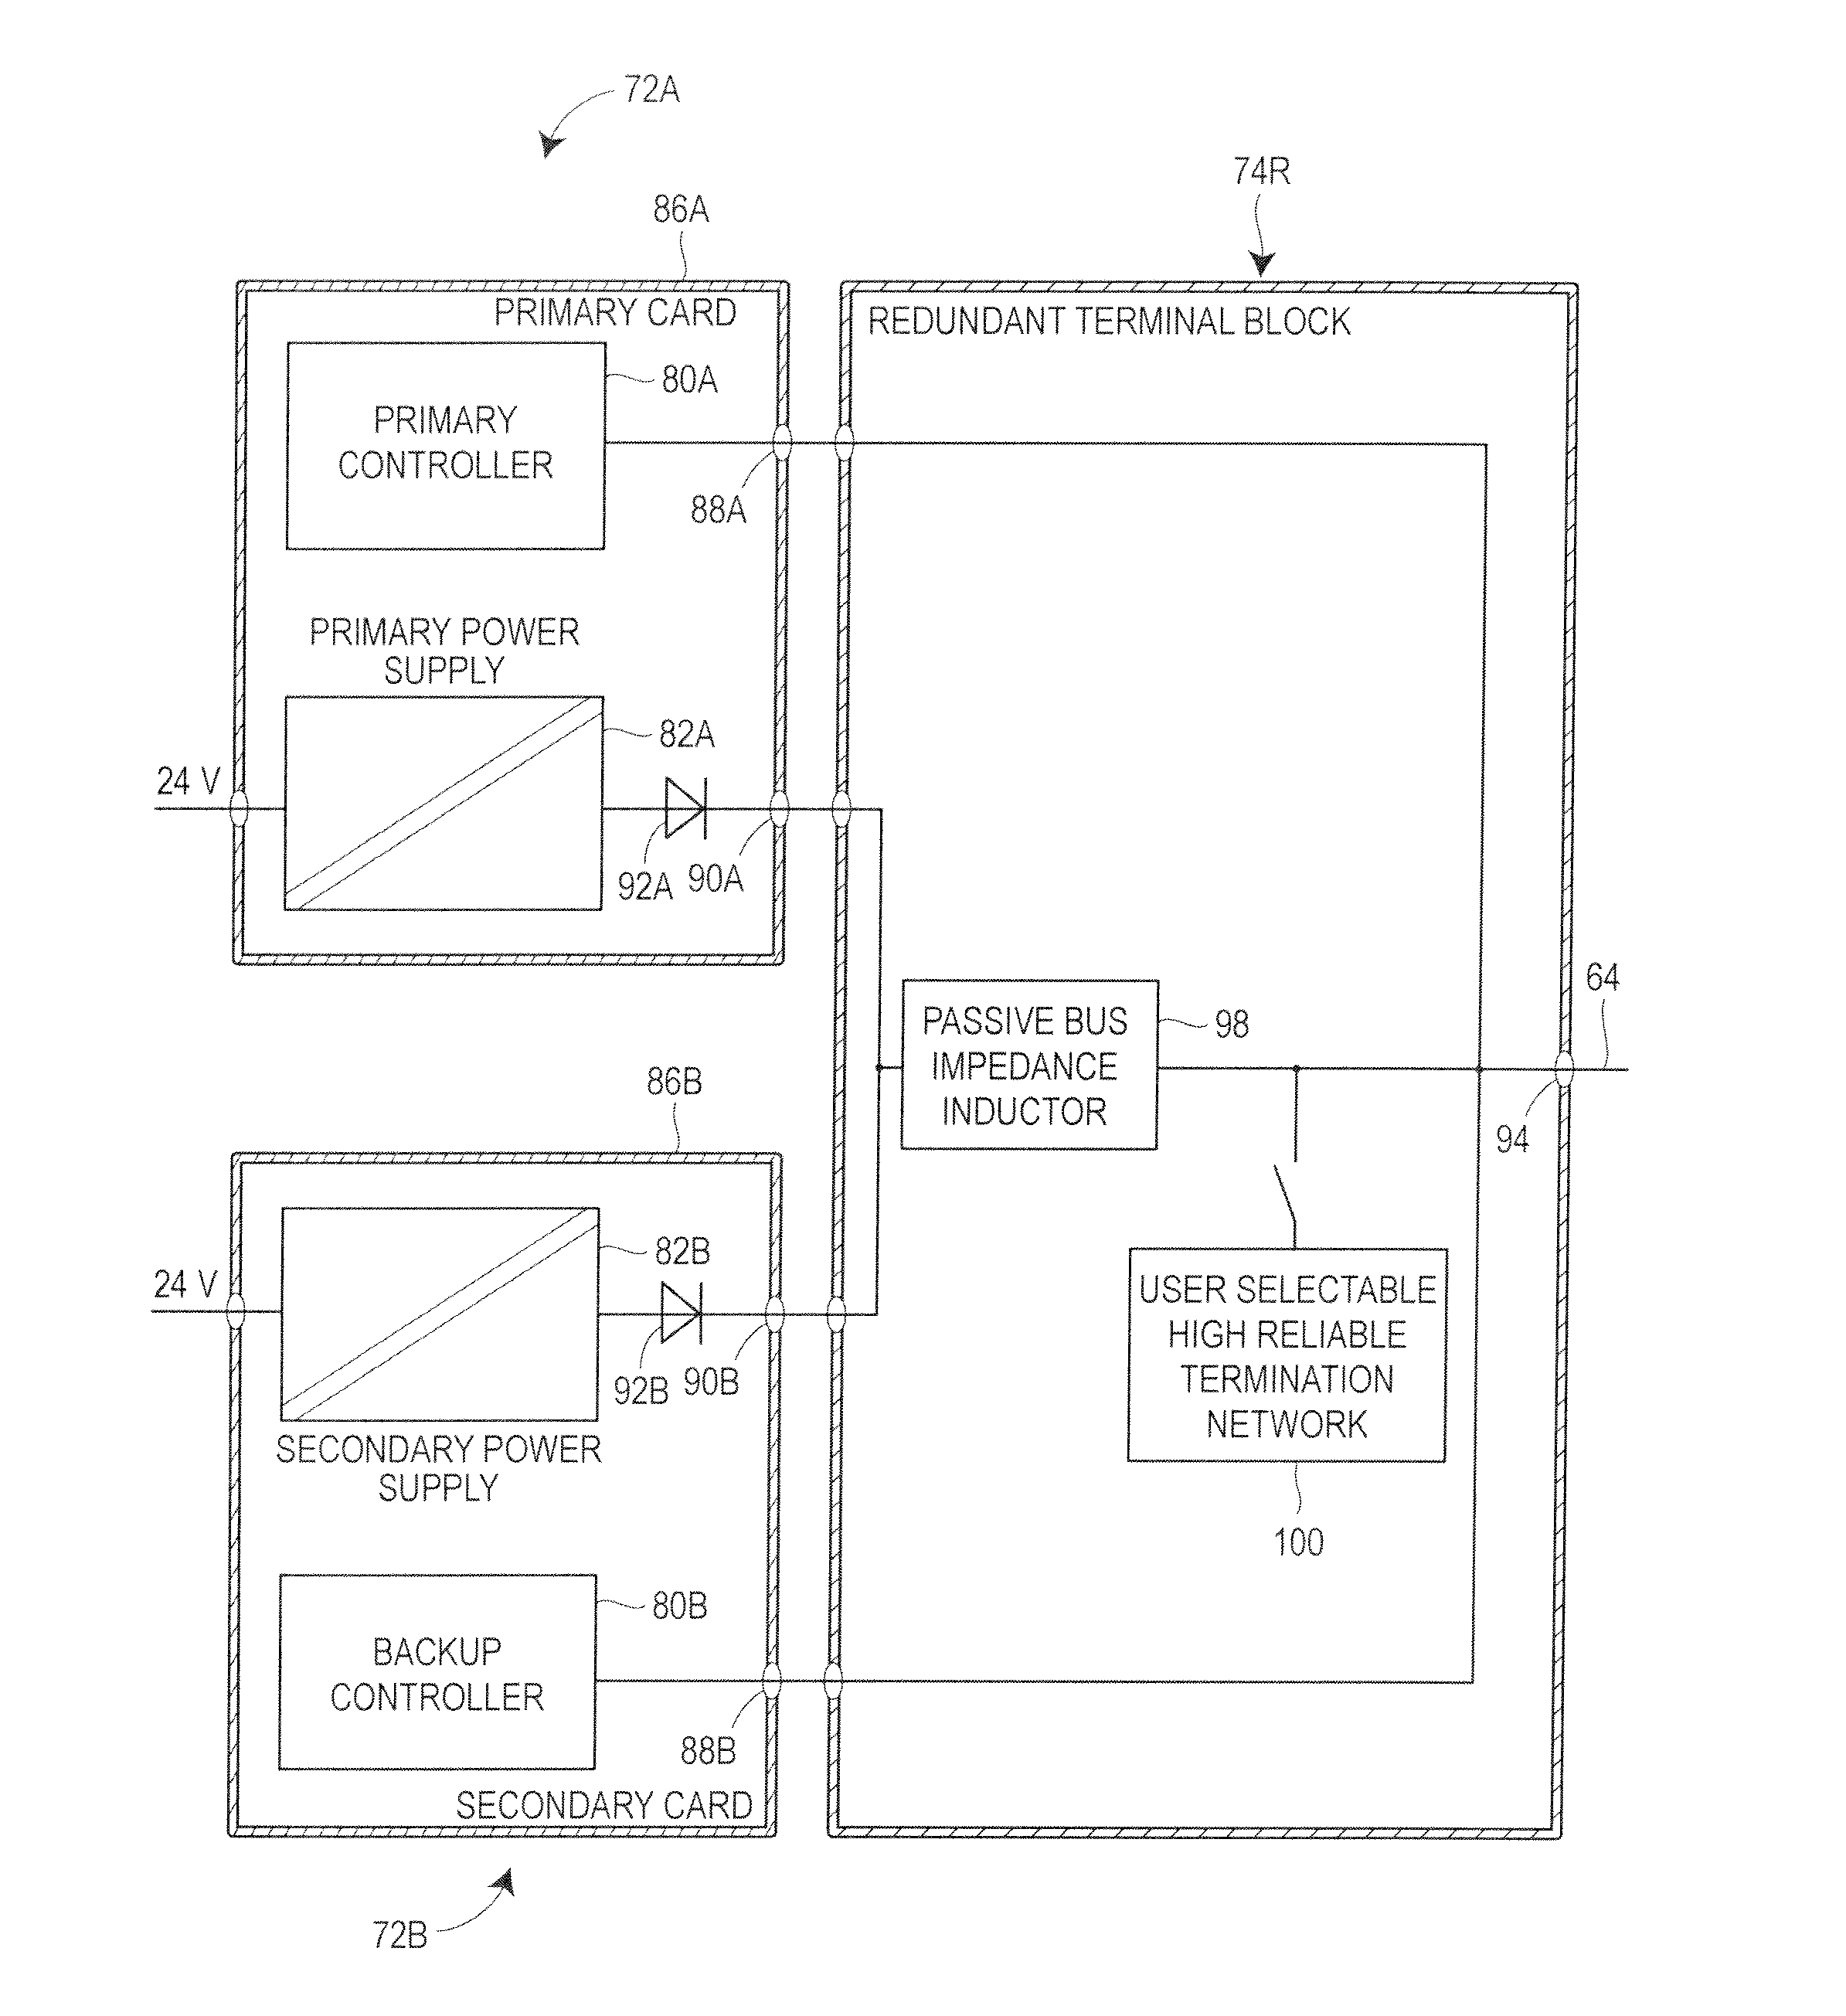 Integrated bus controller and power supply device for use in a process control system